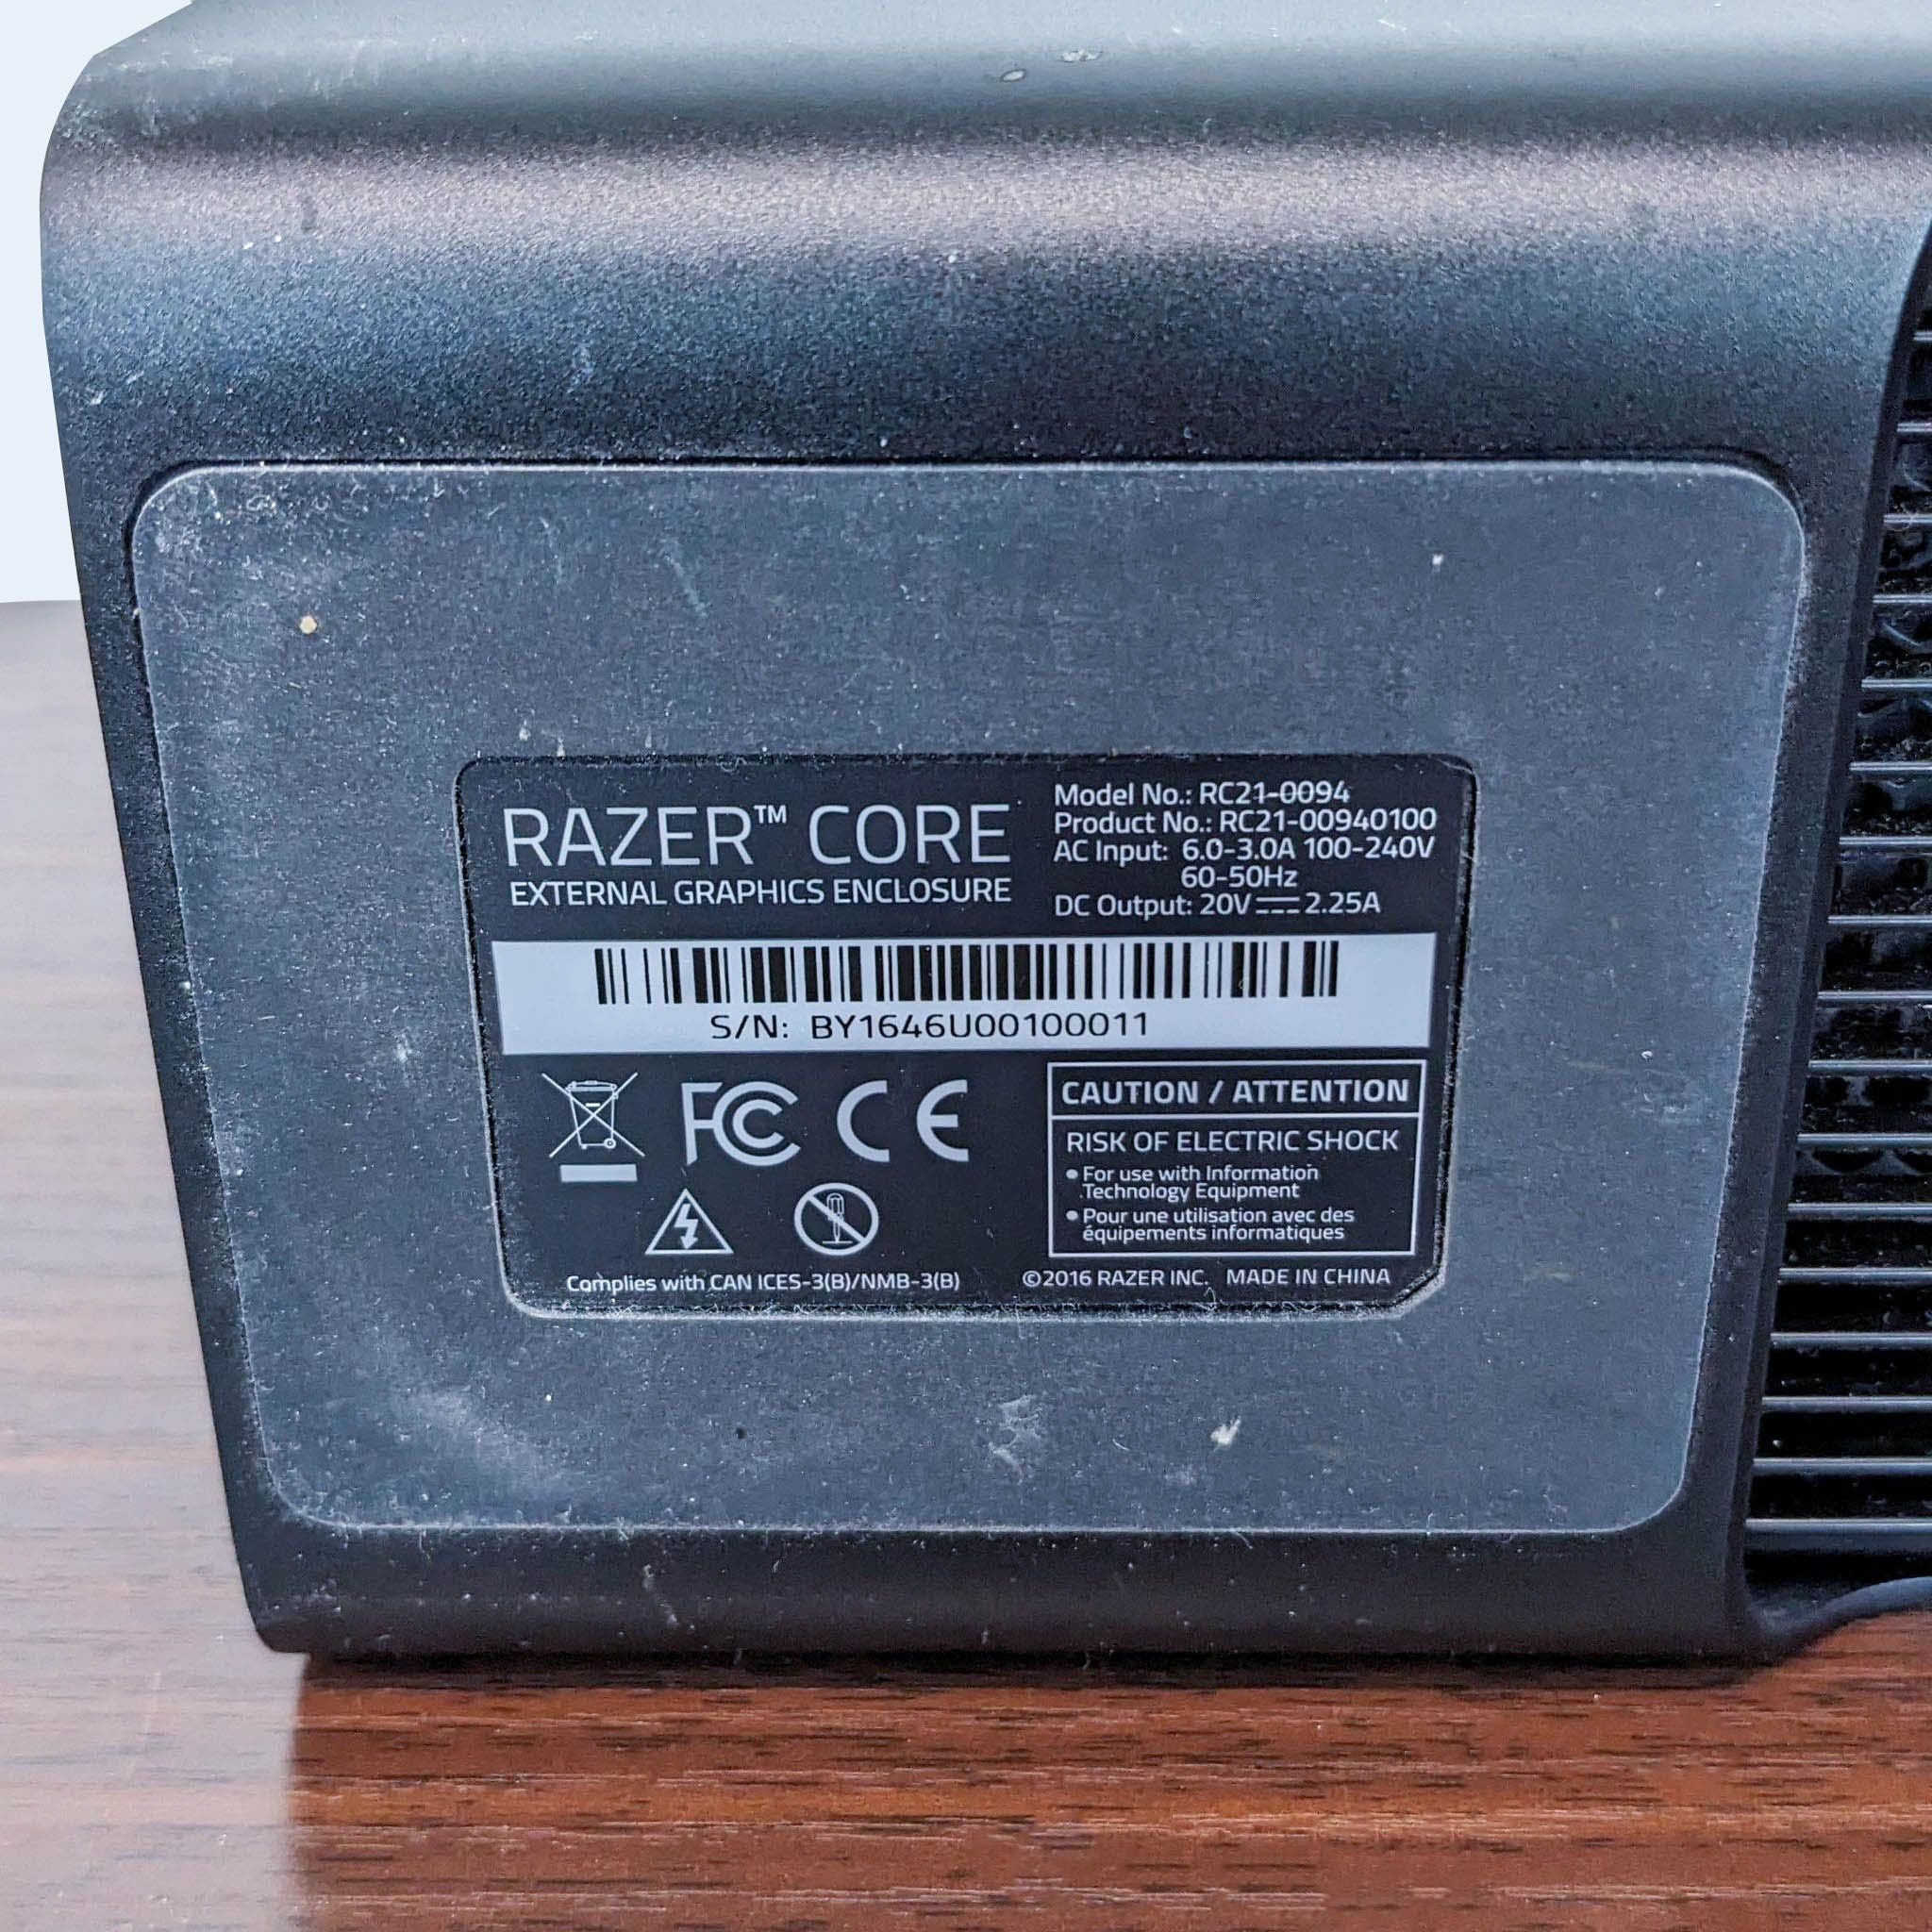 Razer Core external graphics enclosure label close-up, showing product details and warnings on a textured black surface.